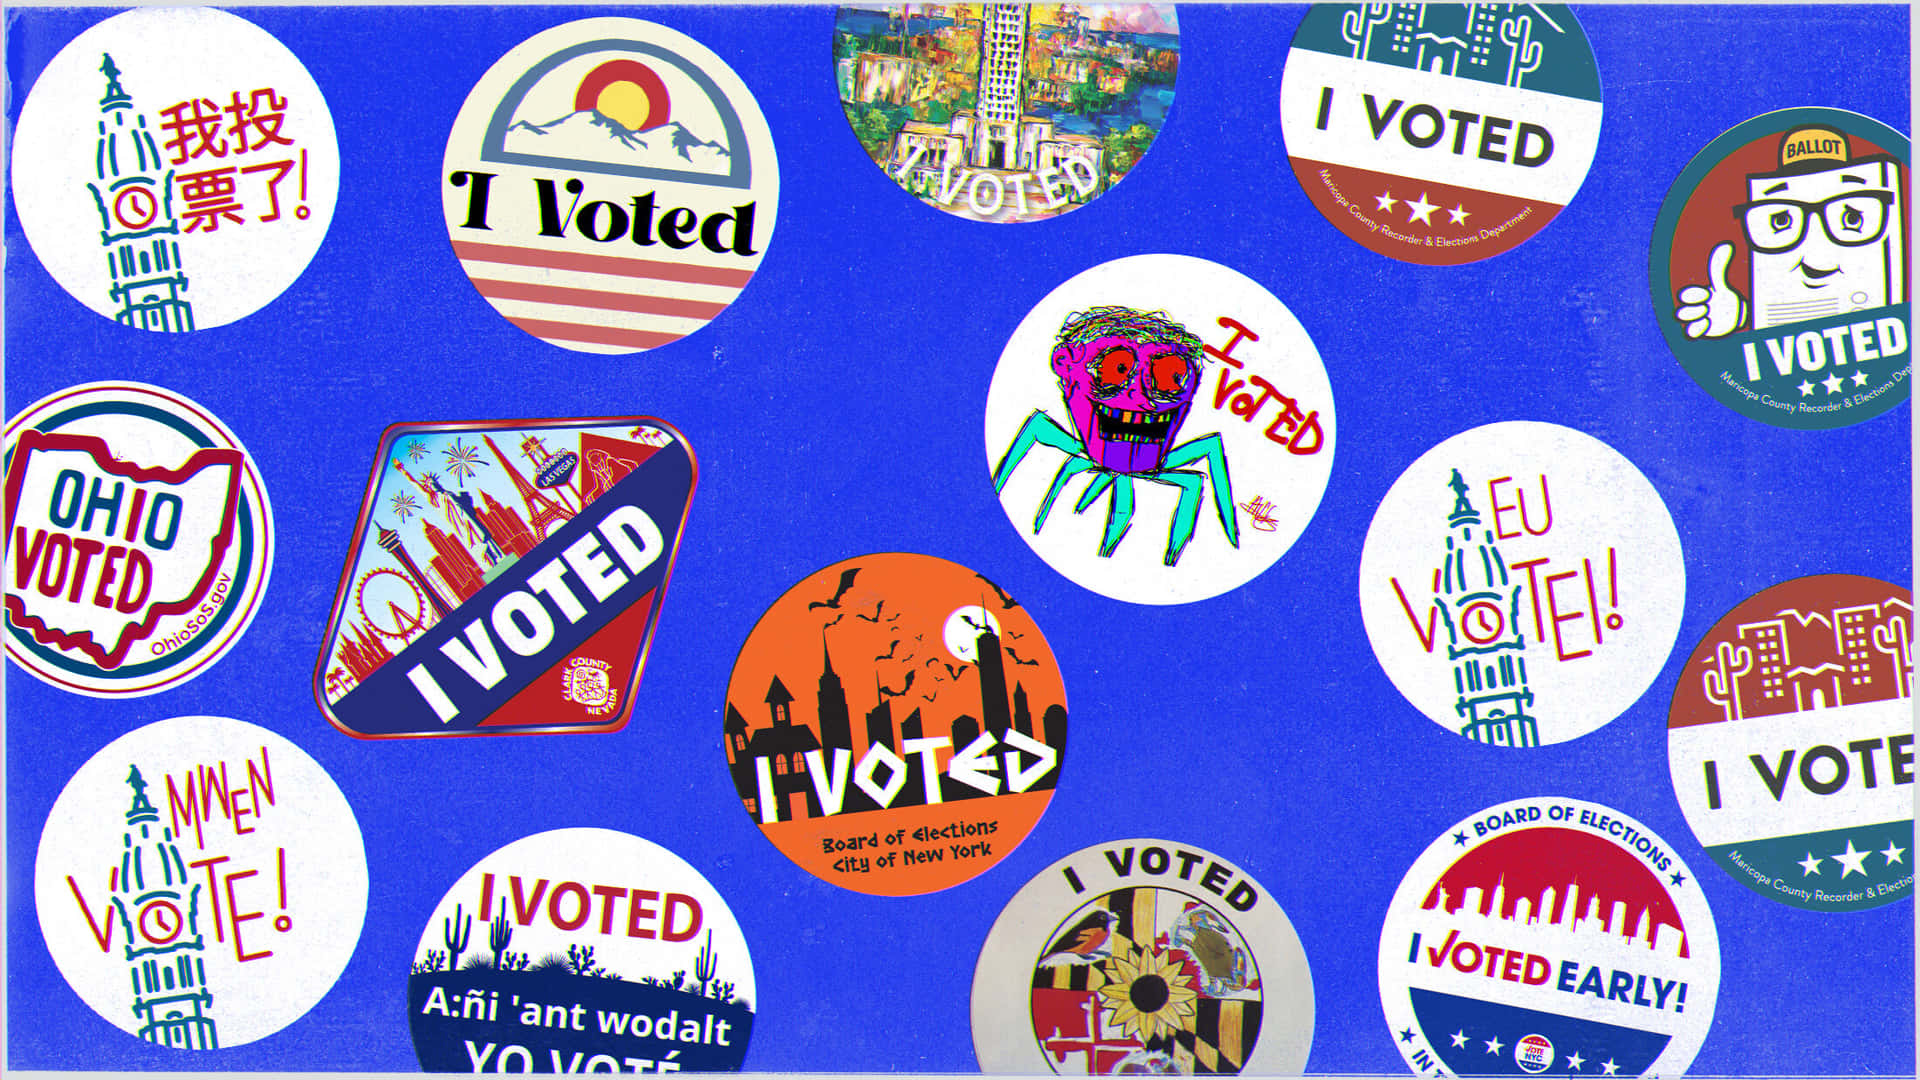 A Group Of Voting Buttons With Different Designs